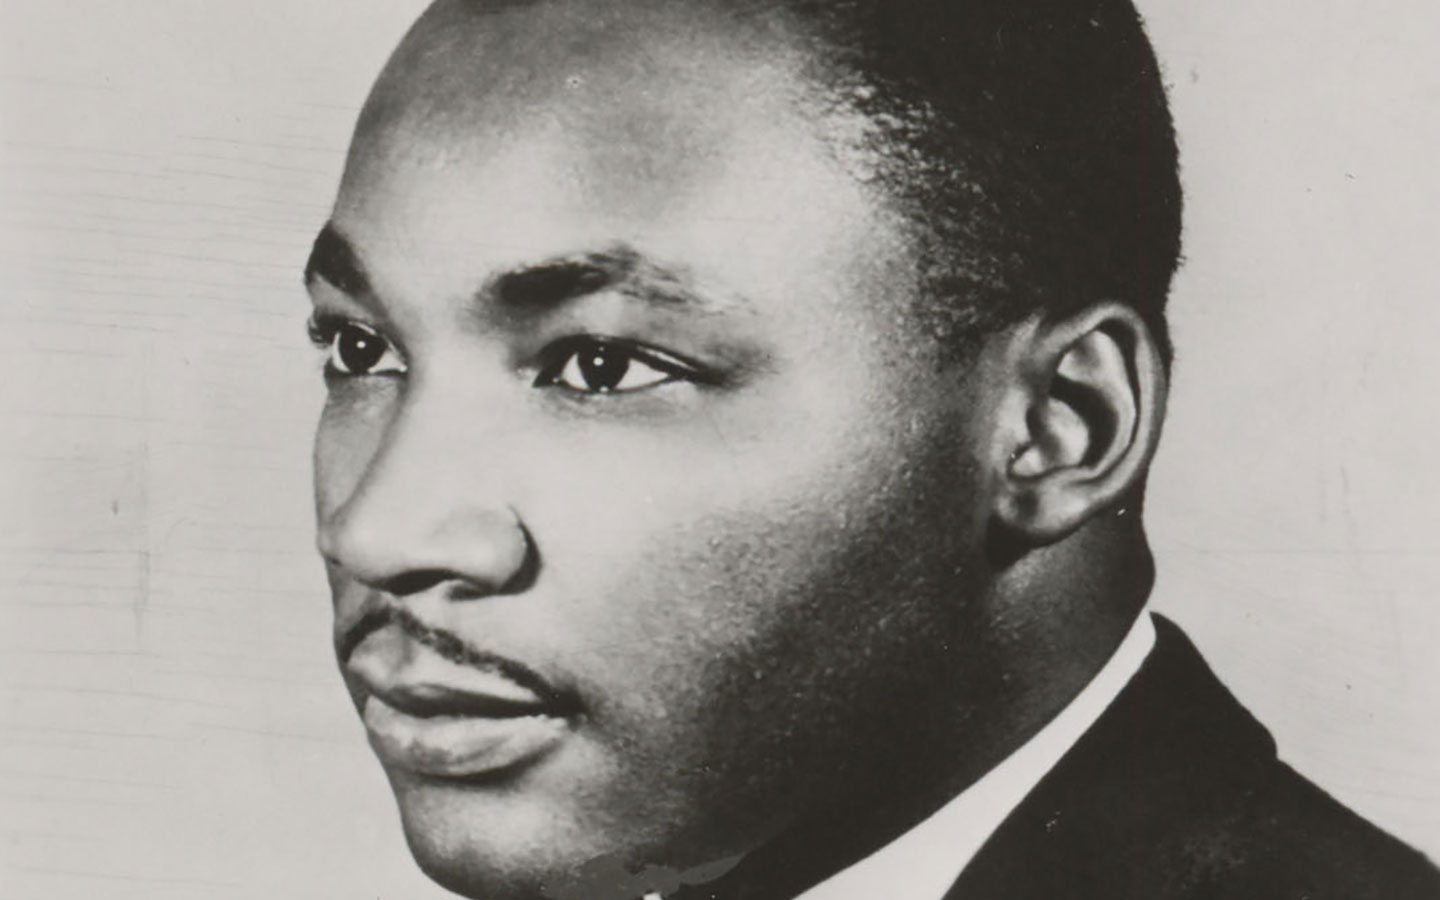 Martin Luther King, Jr. c. 1957, when he received a Roosevelt University Founders and Friends Award.